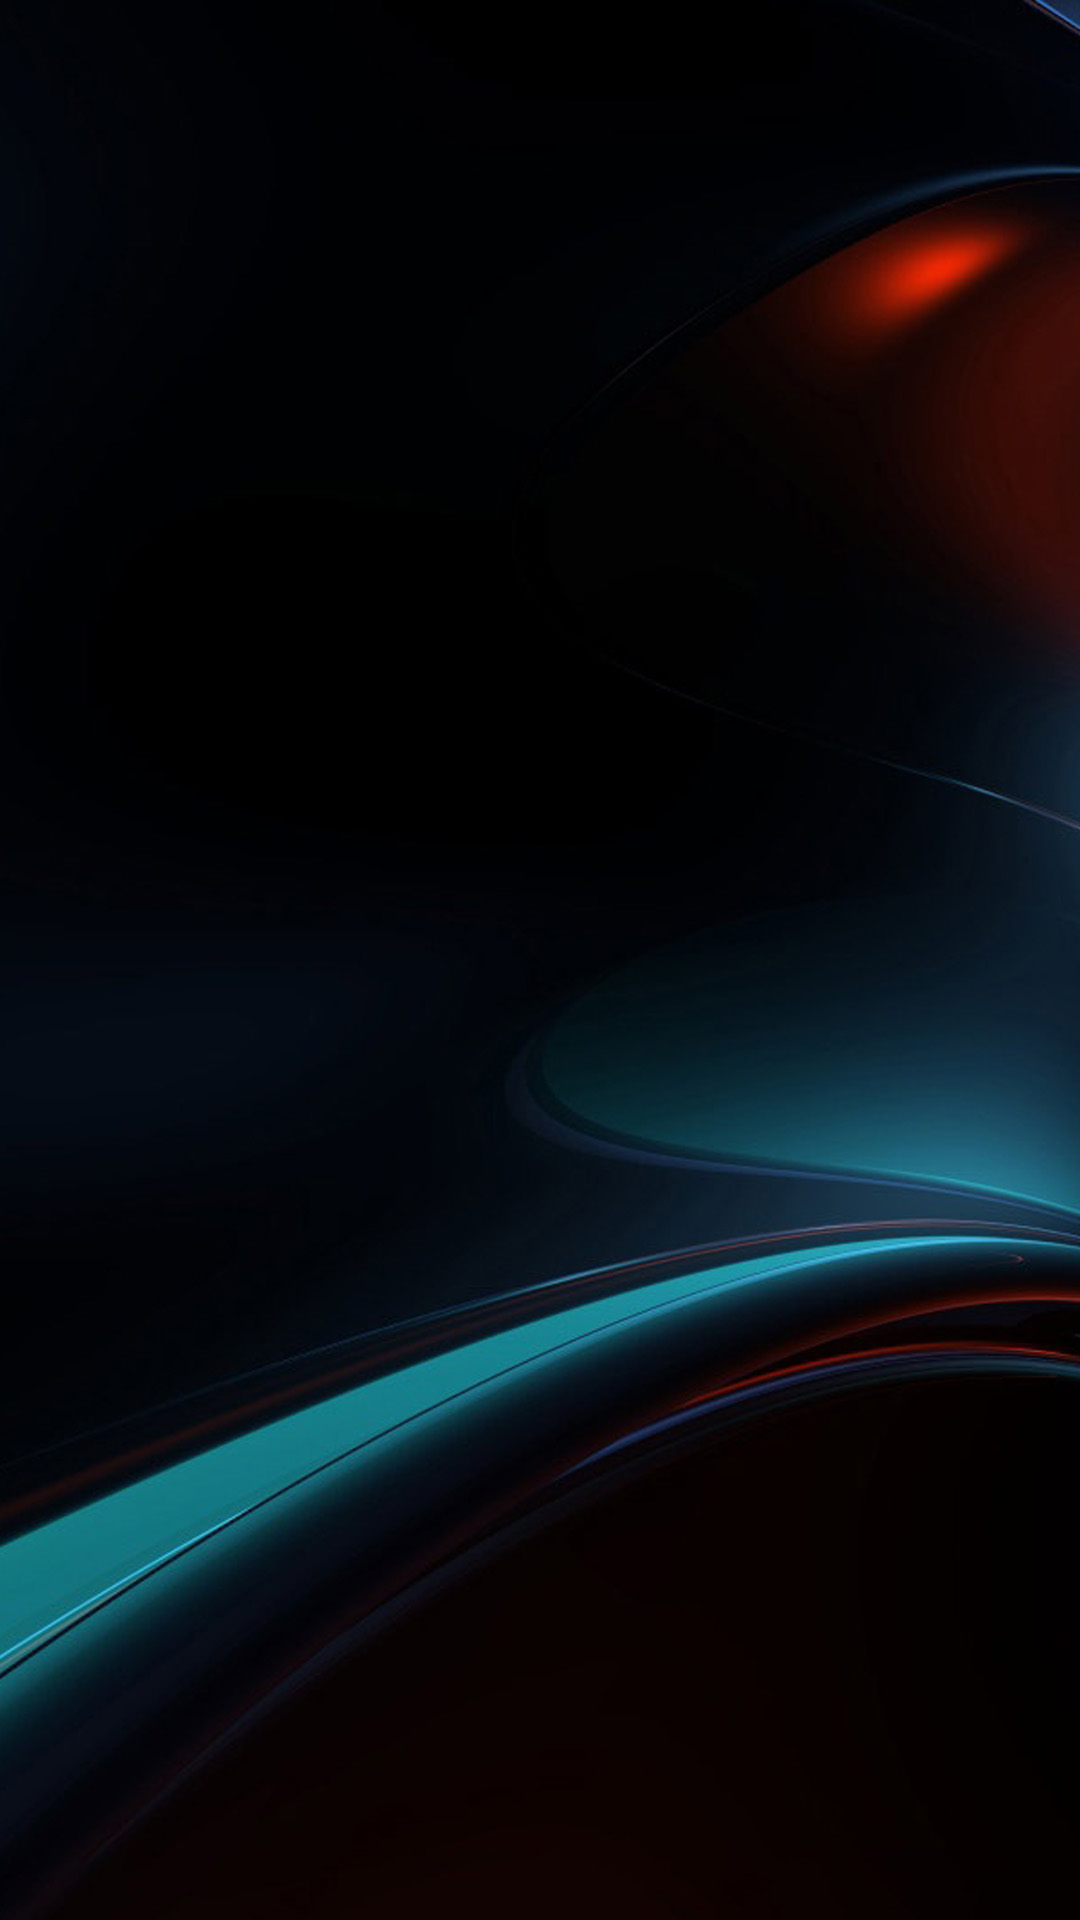 Abstract Galaxy S4 Wallpapers hd